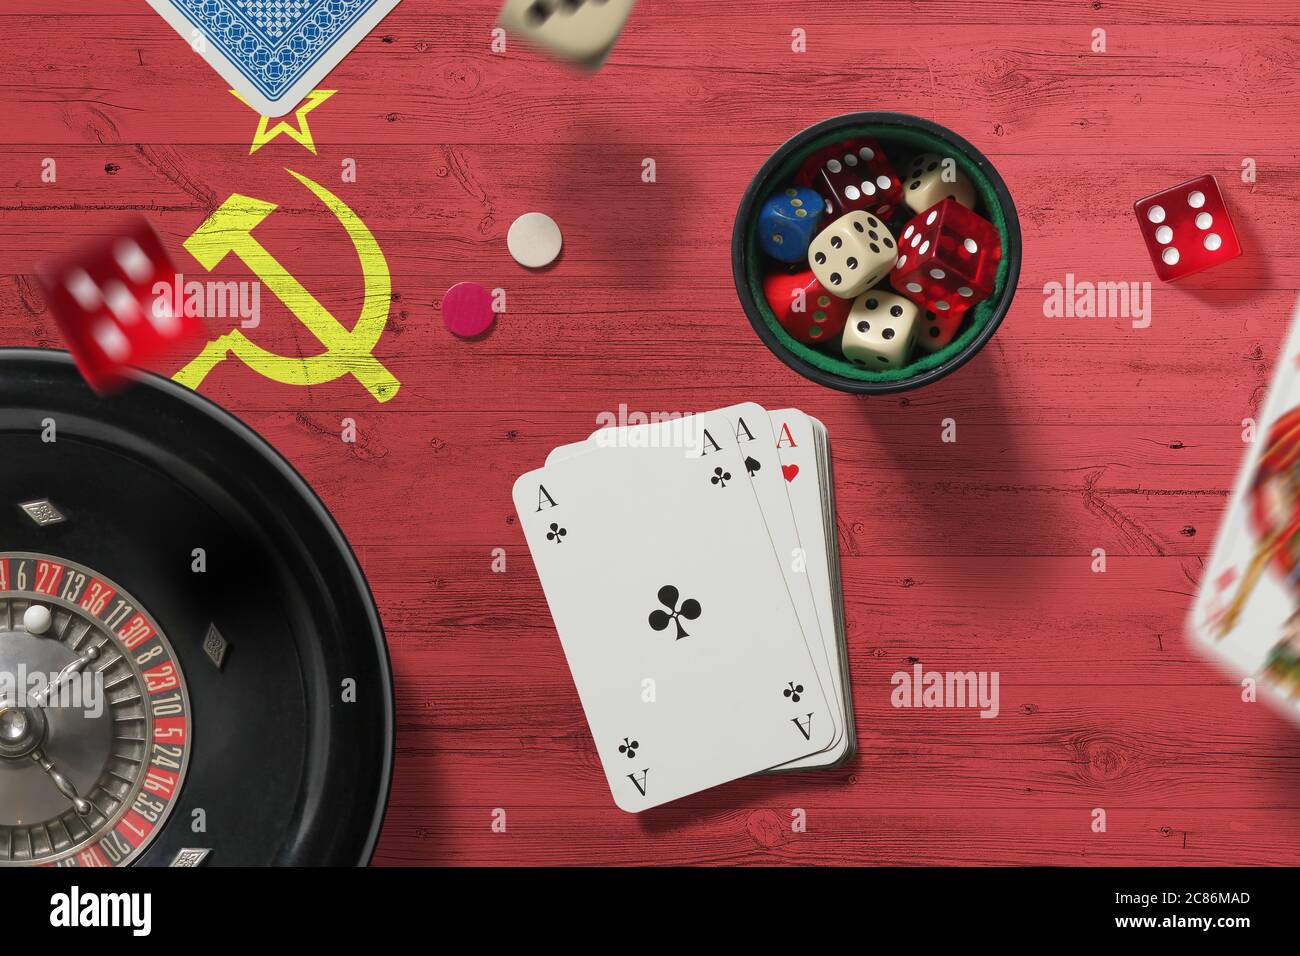 Soviet Union casino theme. Aces in poker game, cards and chips on red table with national flag background. Gambling and betting. Stock Photo